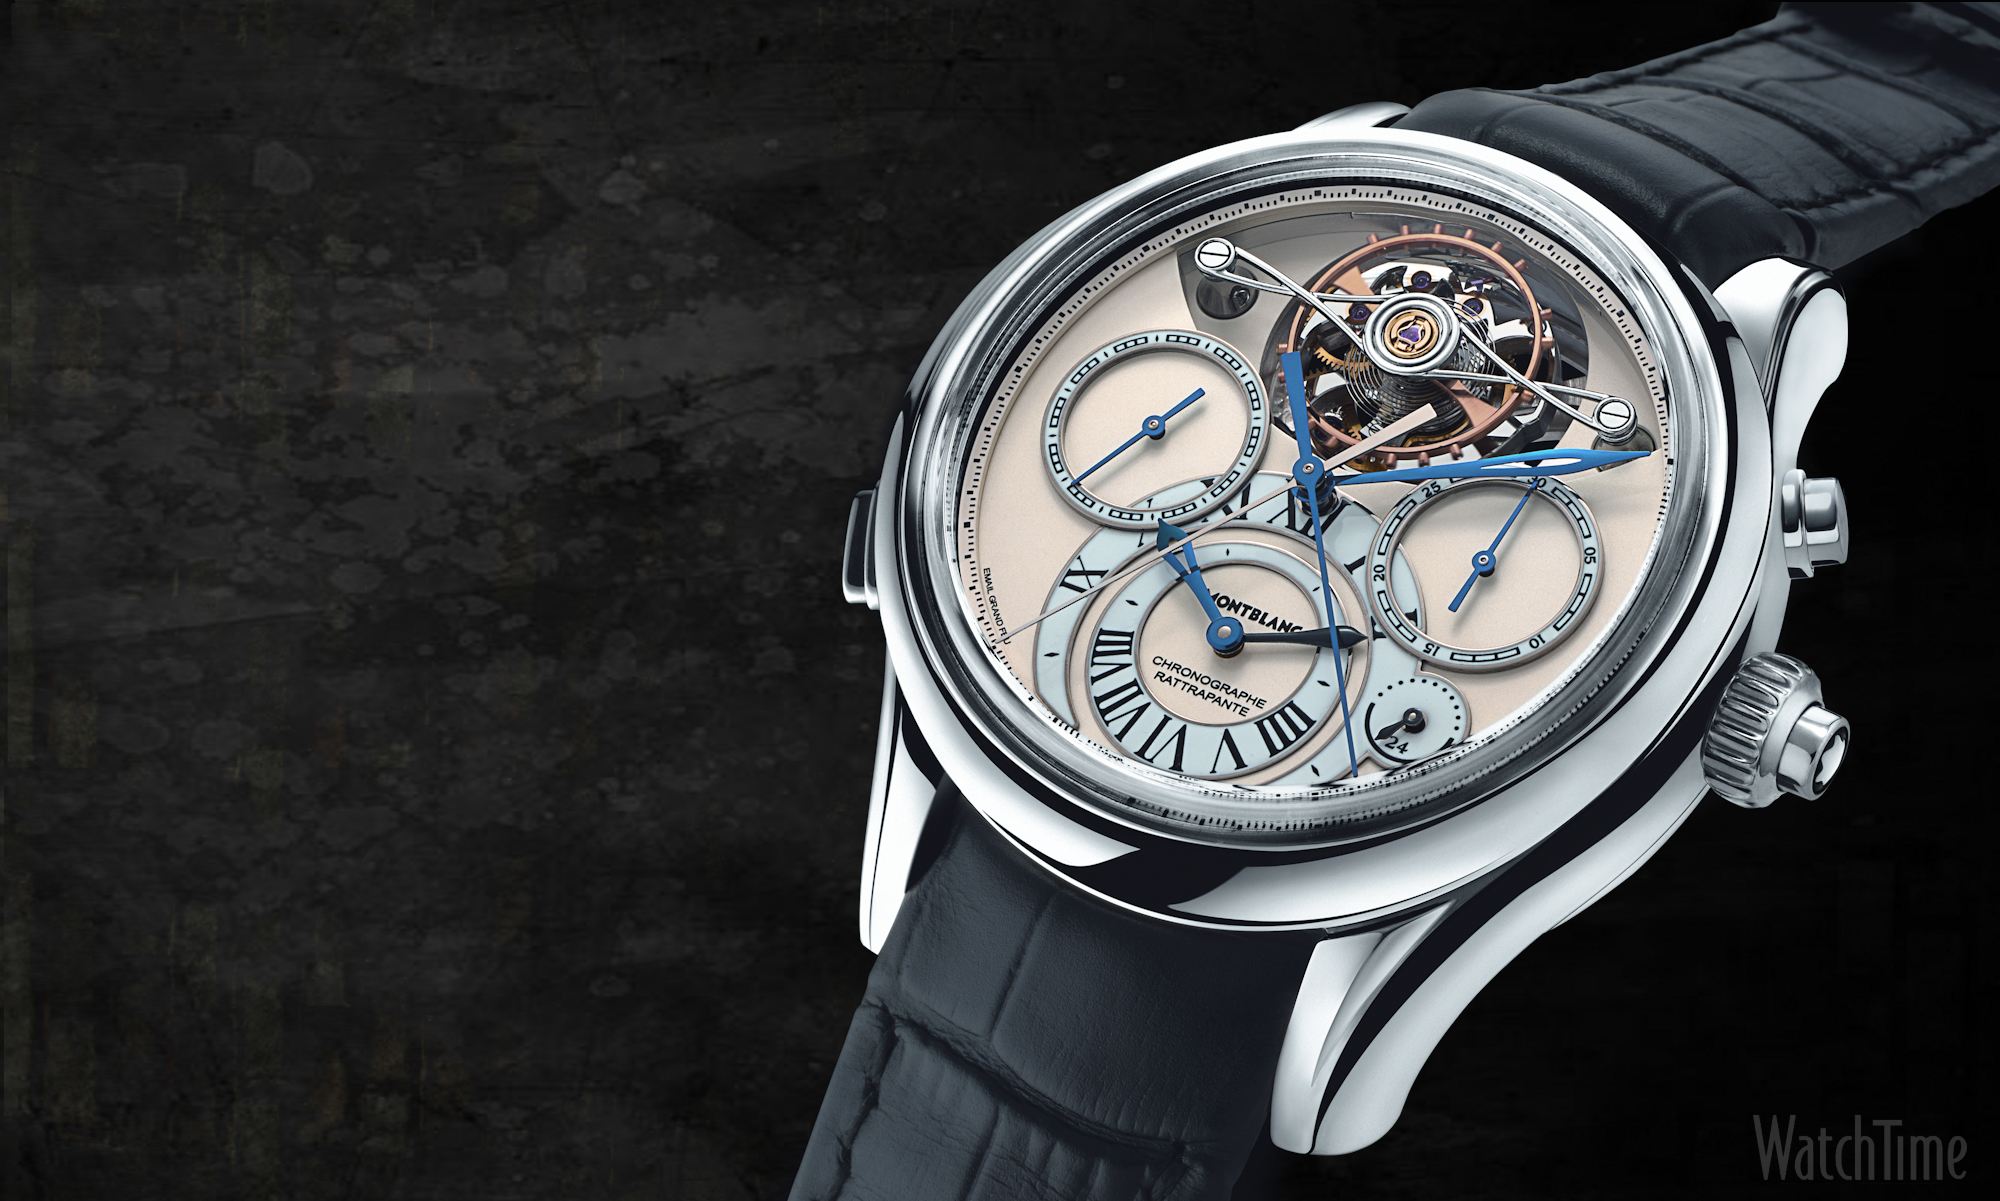 Watch Wallpaper: 8 Montblanc Watches and Movements. WatchTime's No.1 Watch Magazine